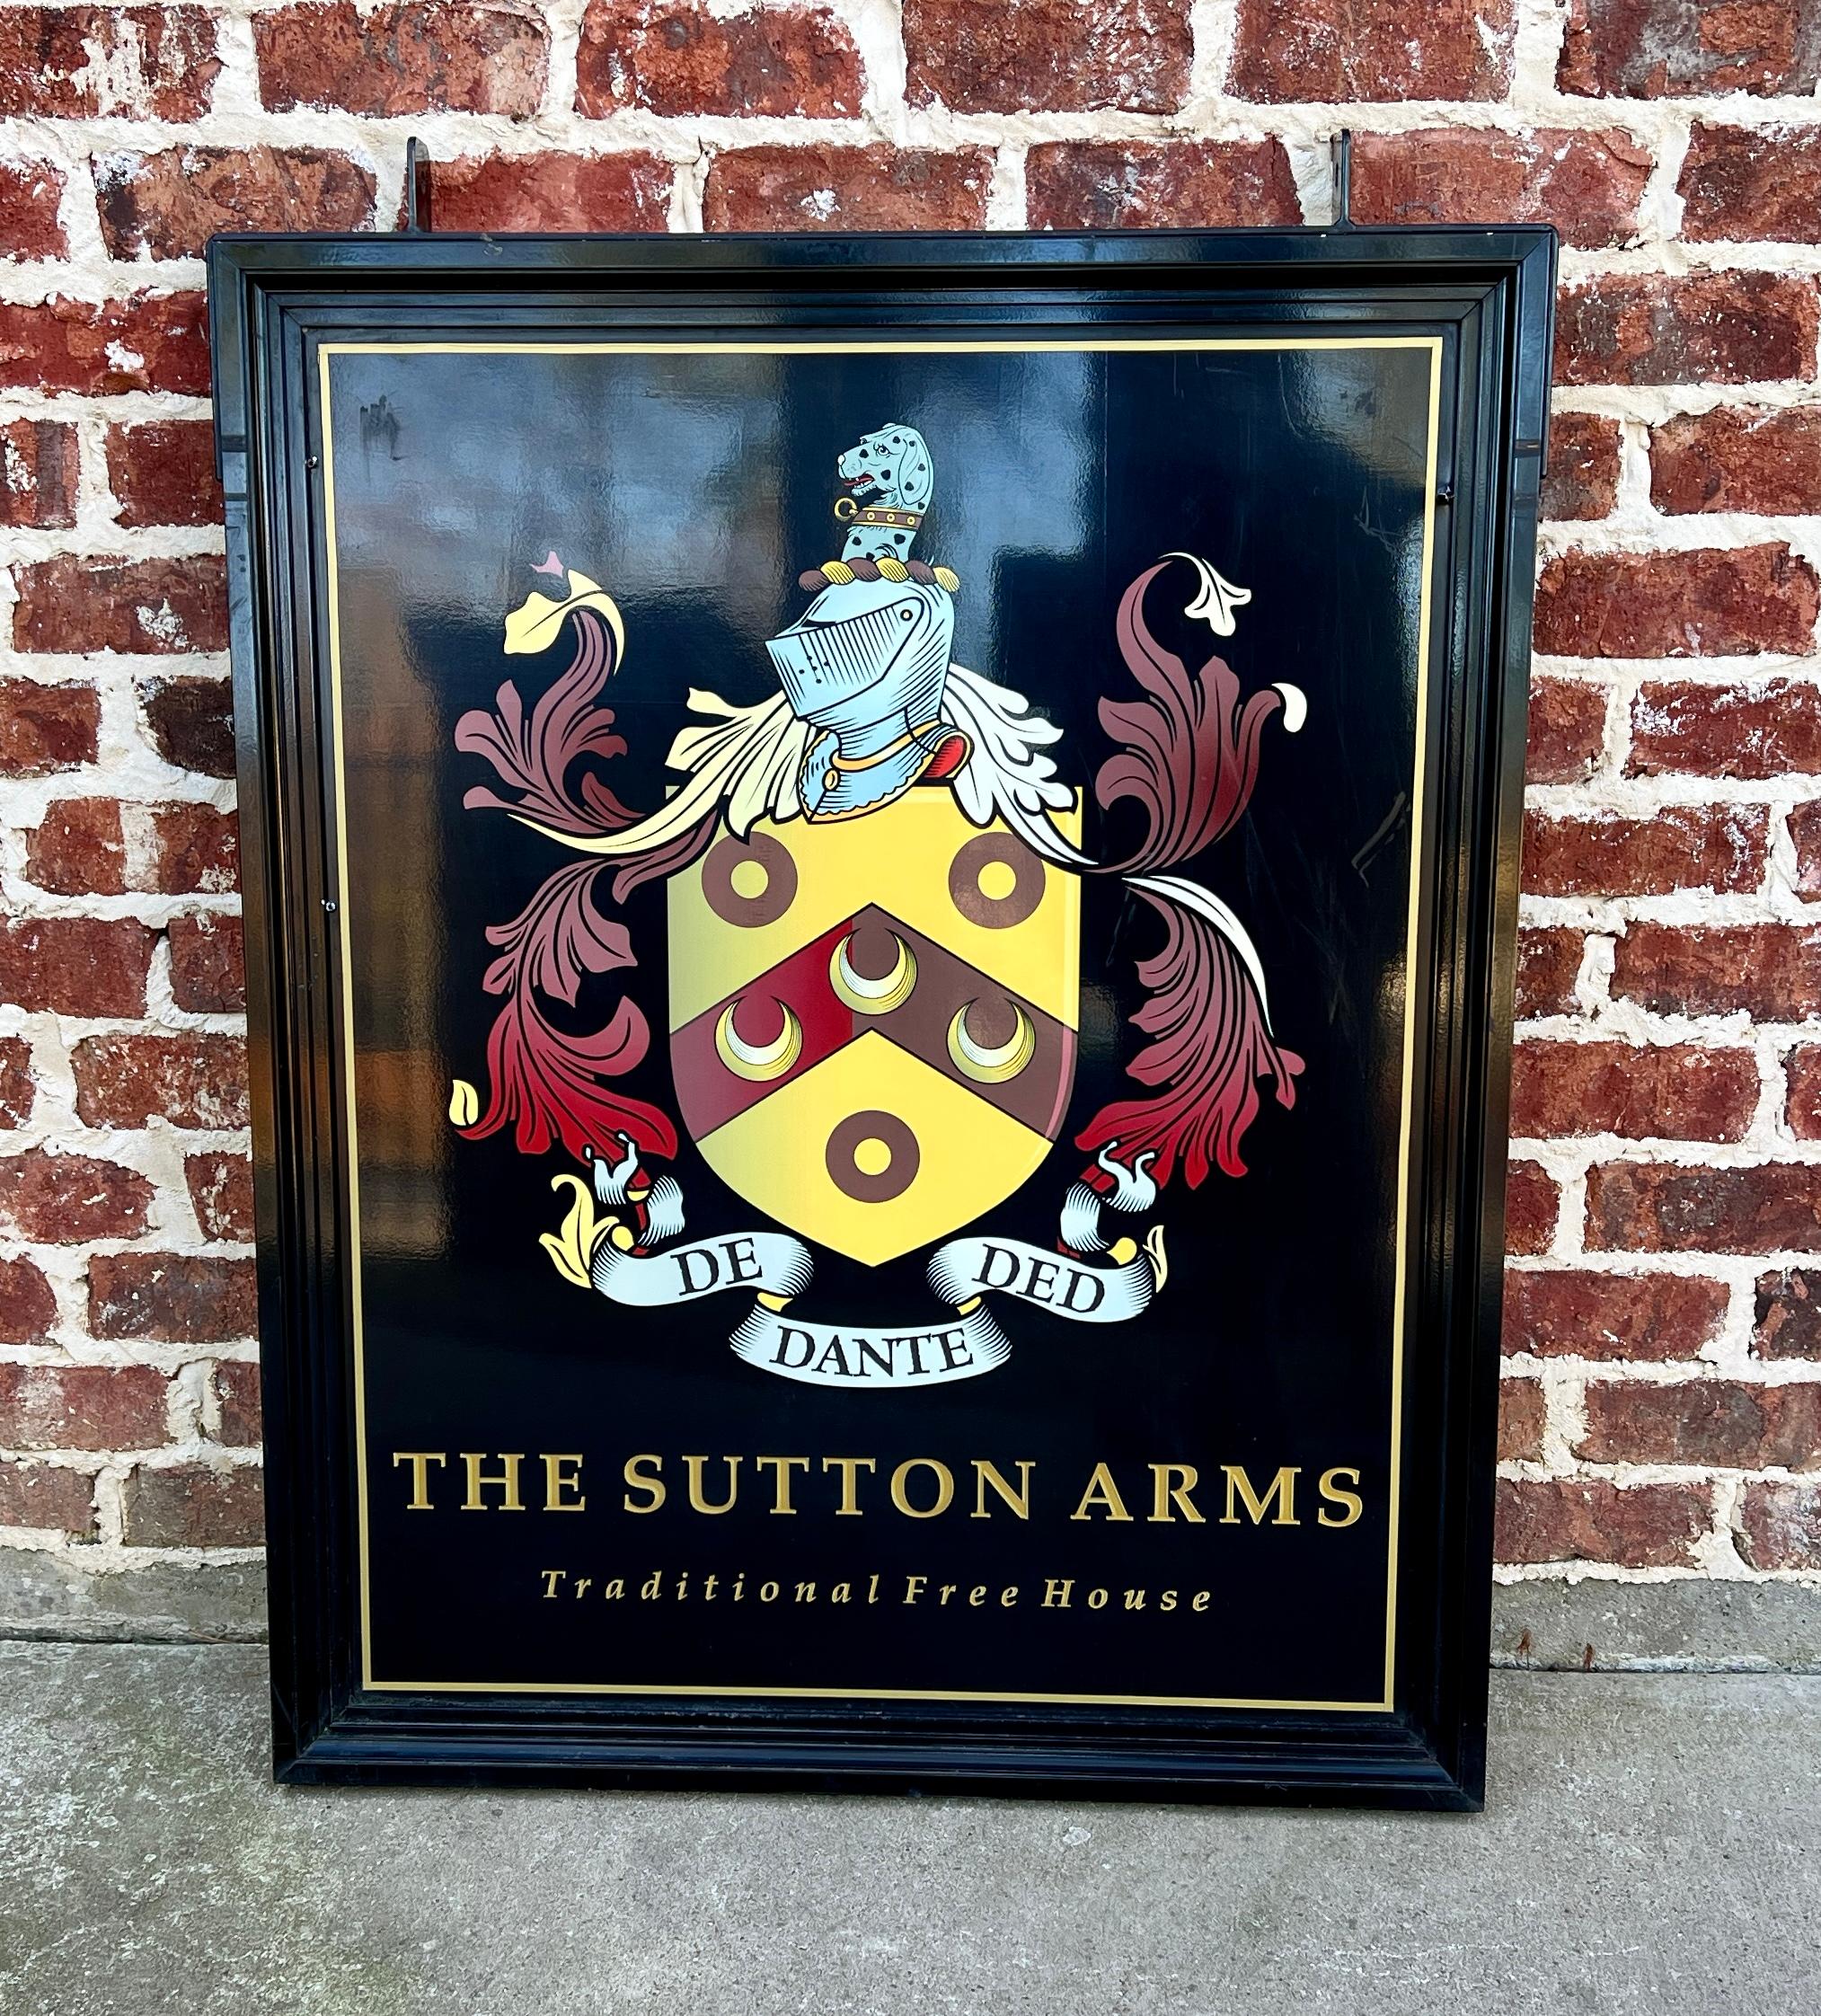 Vintage English Hanging Double Sided Metal Pub Sign~~The Sutton Arms~~ Traditional Free House    

42